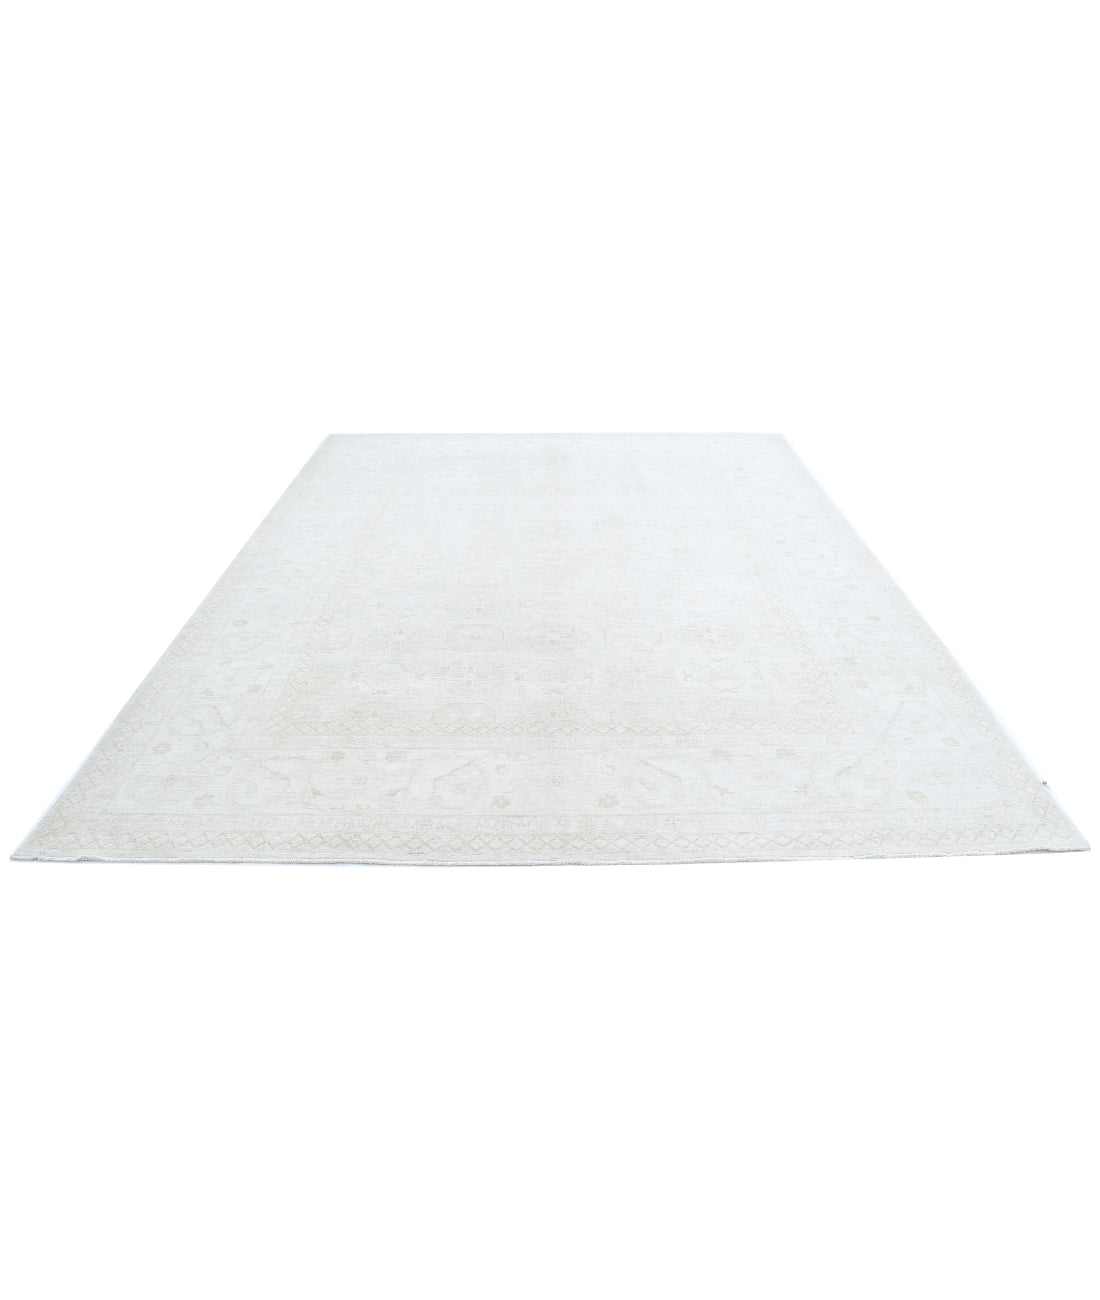 Serenity 9'1'' X 11'8'' Hand-Knotted Wool Rug 9'1'' x 11'8'' (273 X 350) / Ivory / Taupe